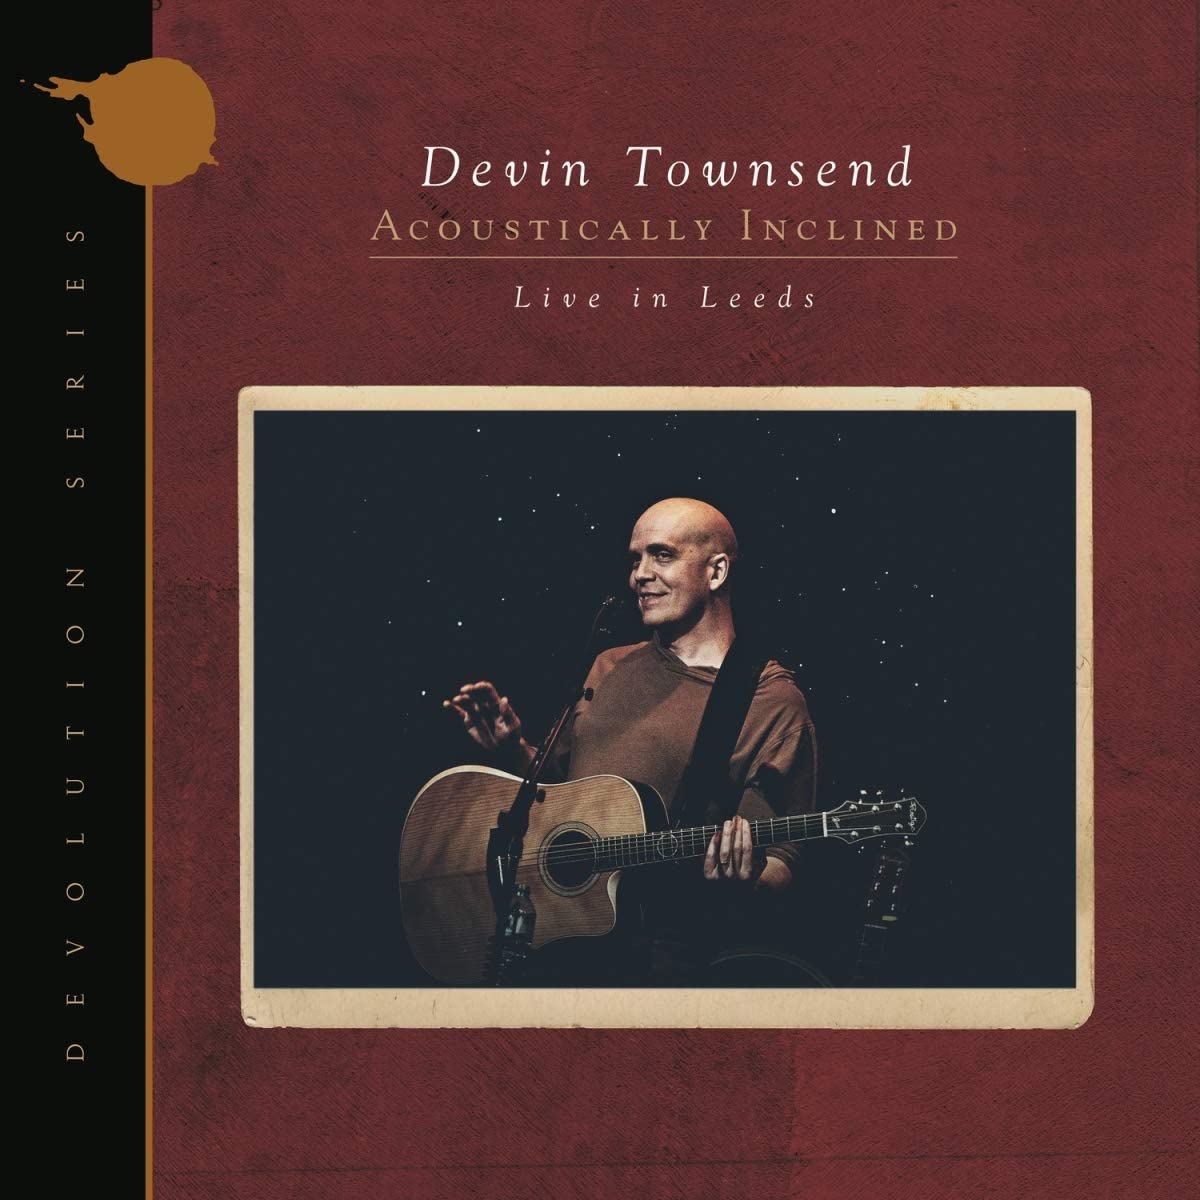 CD - Devin Townsend - Acoustically Inclined, Live In Leeds